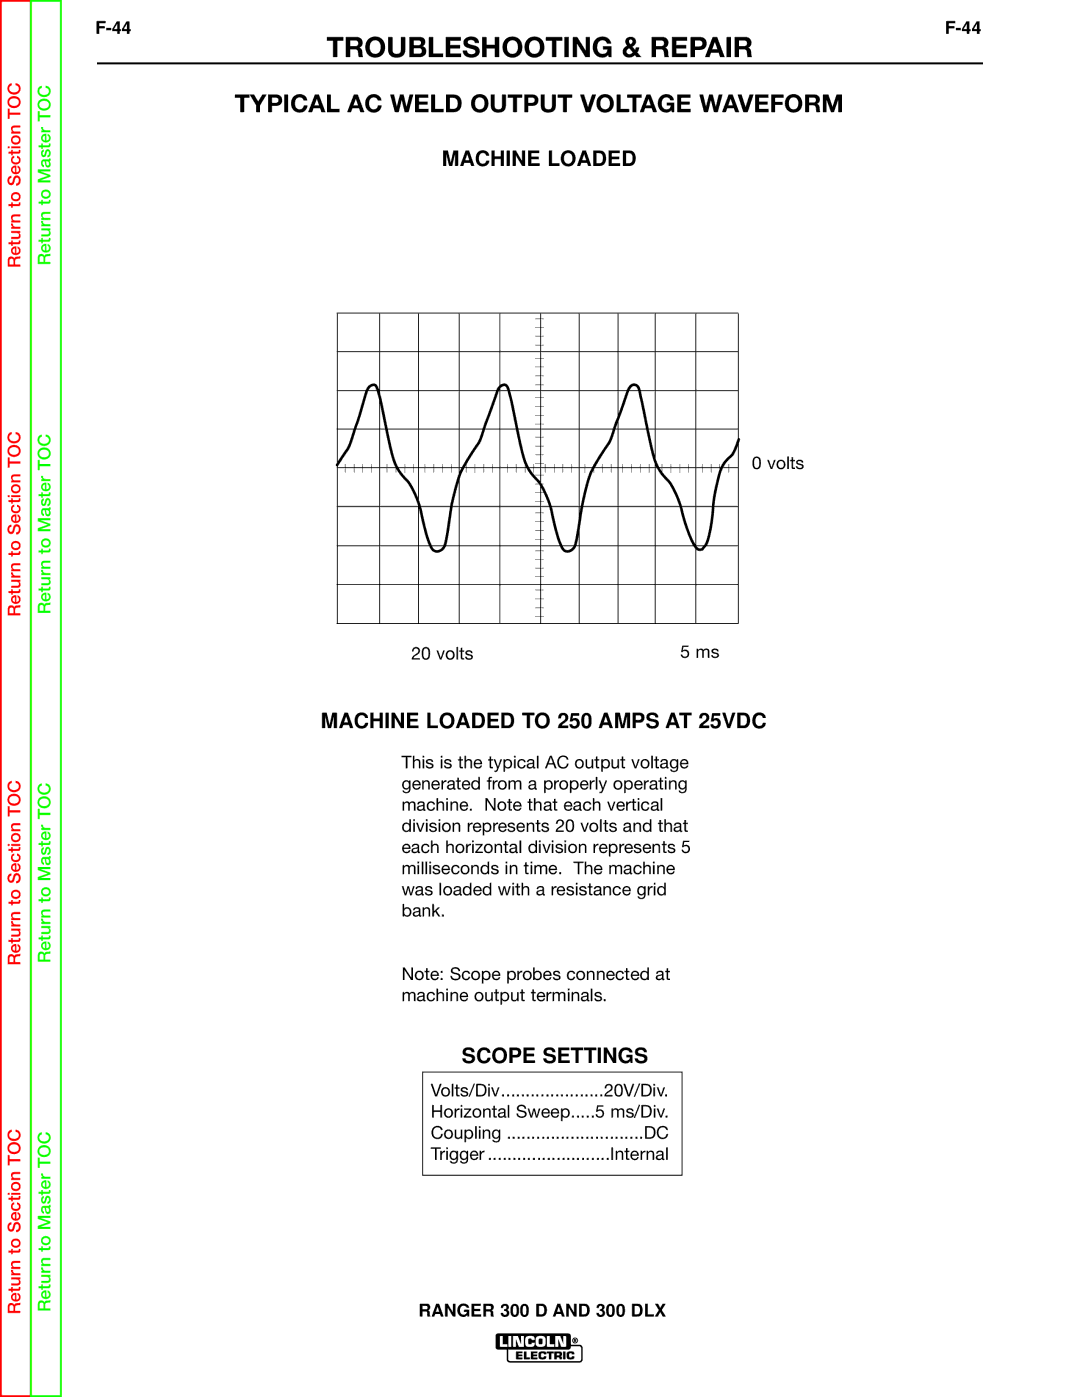 Lincoln Electric SVM148-B service manual Typical AC Weld Output Voltage Waveform, Machine Loaded to 250 Amps AT 25VDC 